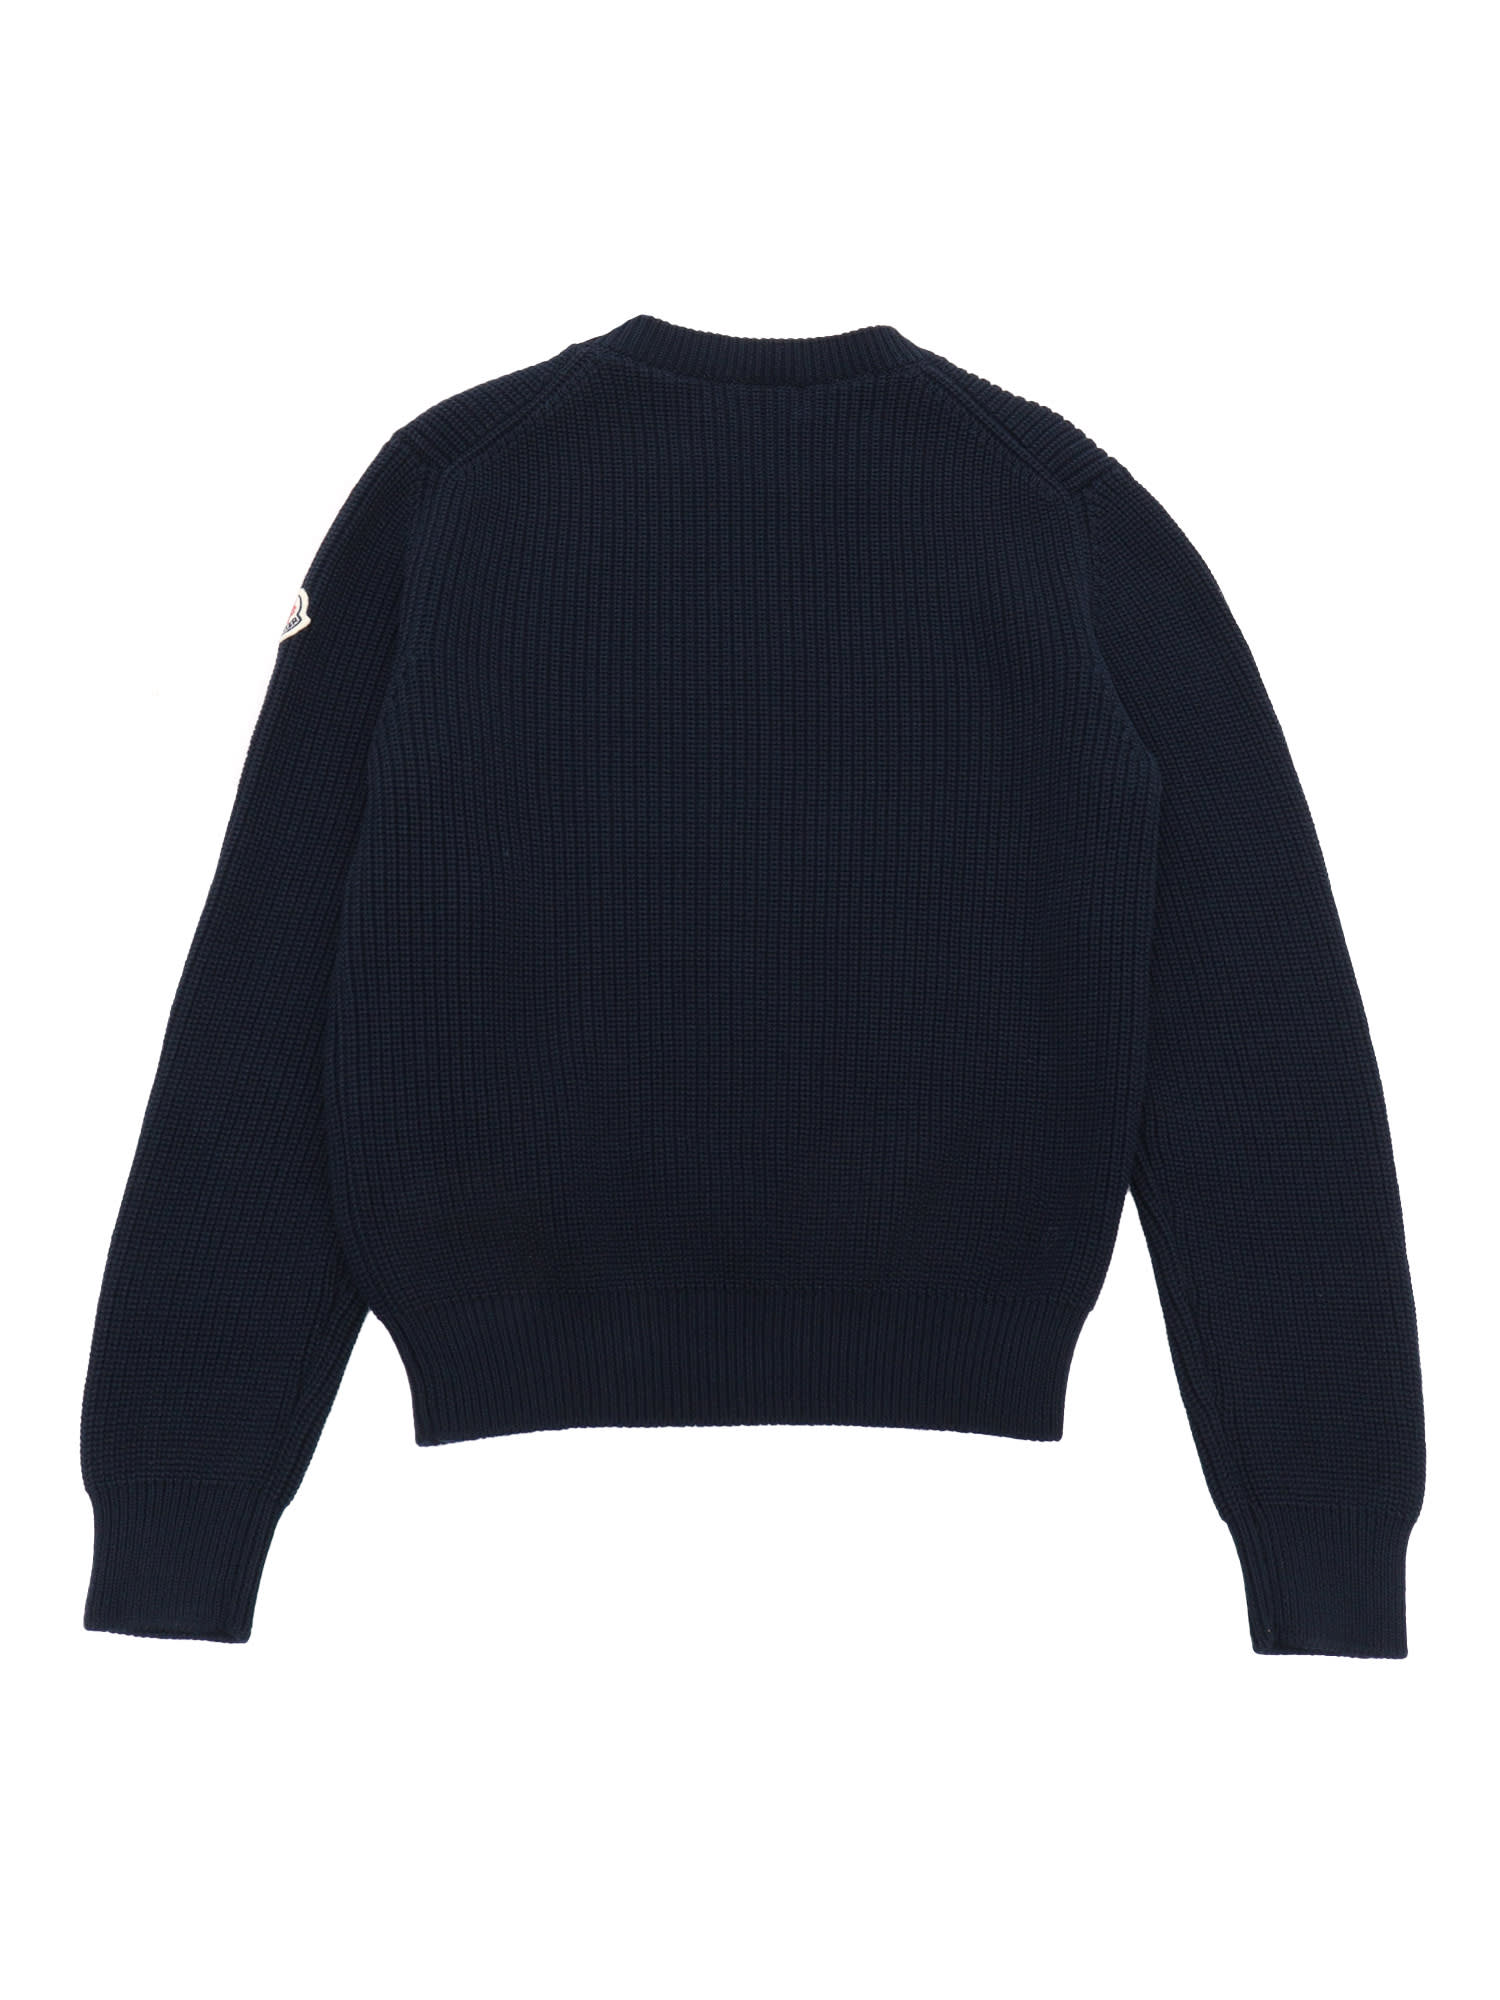 Shop Moncler Blue Ribbed Sweater